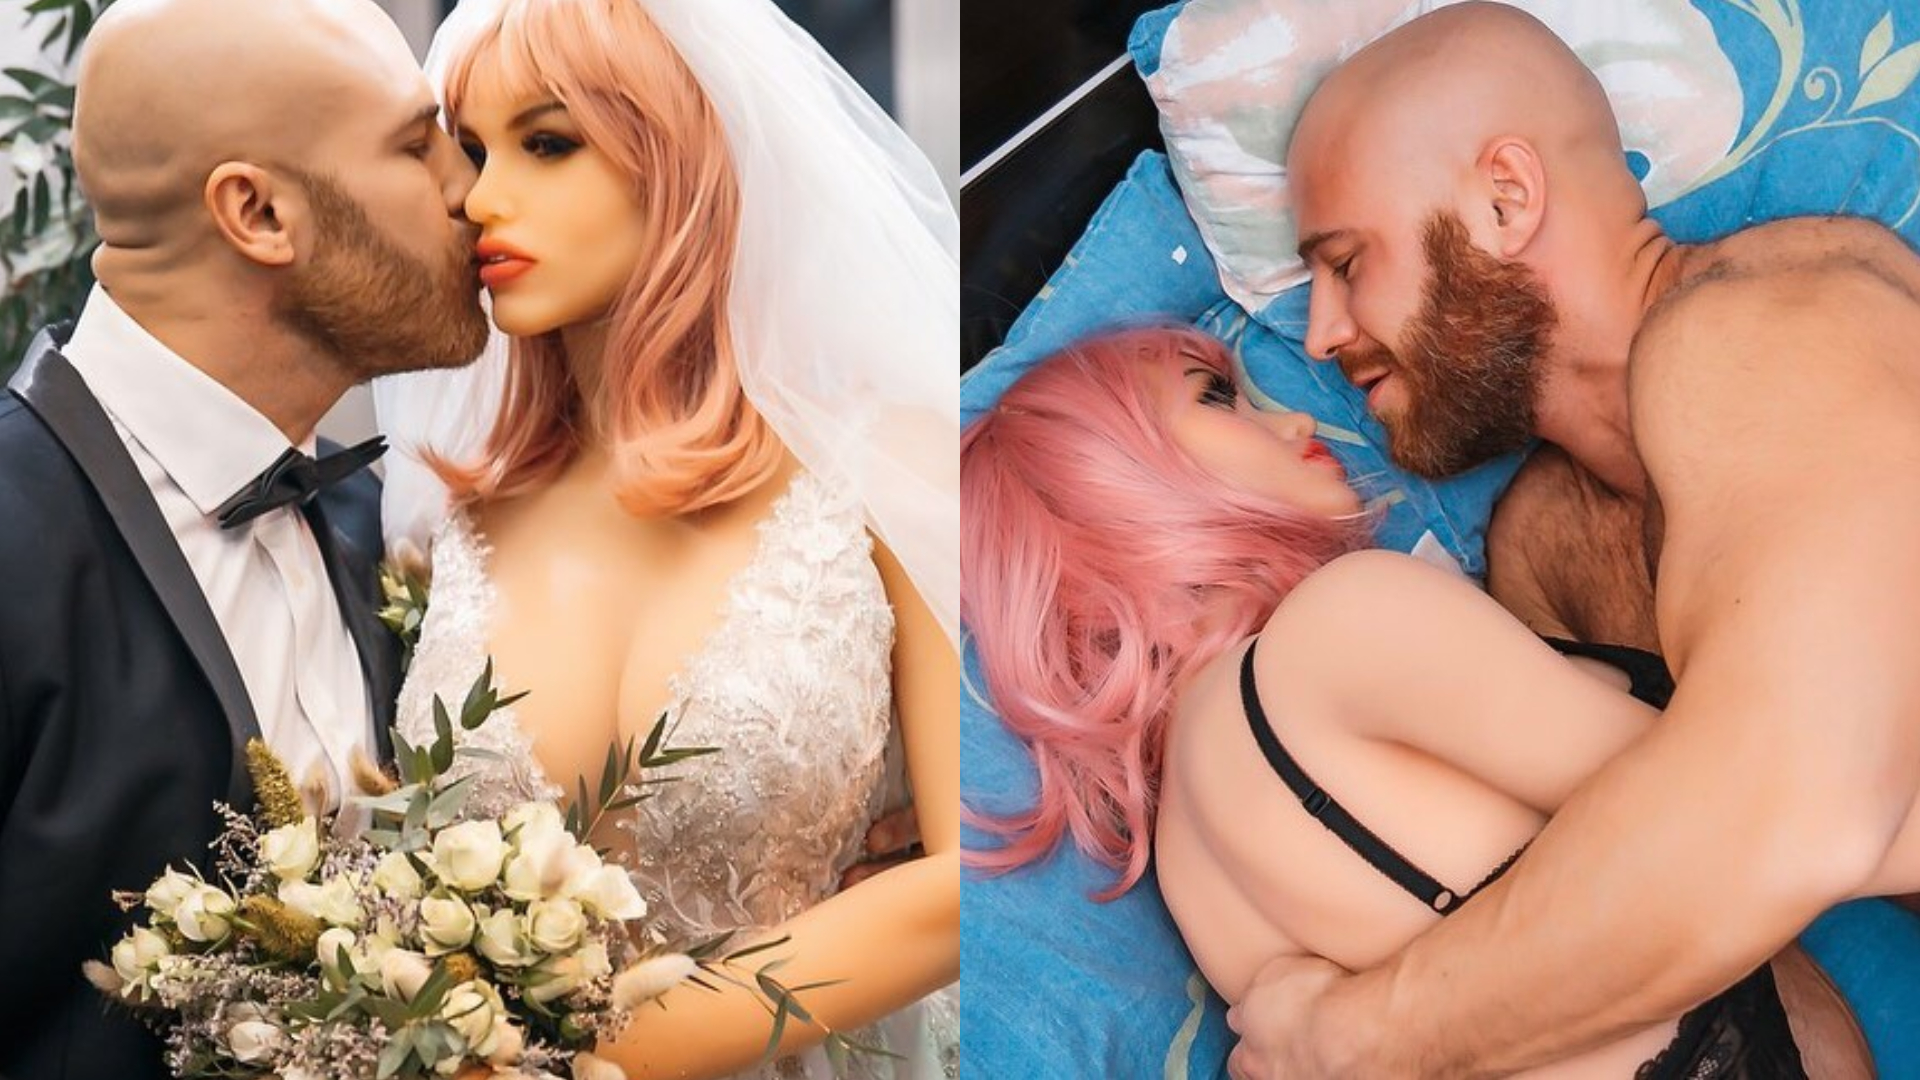 Meet the Man Who Married His Sex Doll